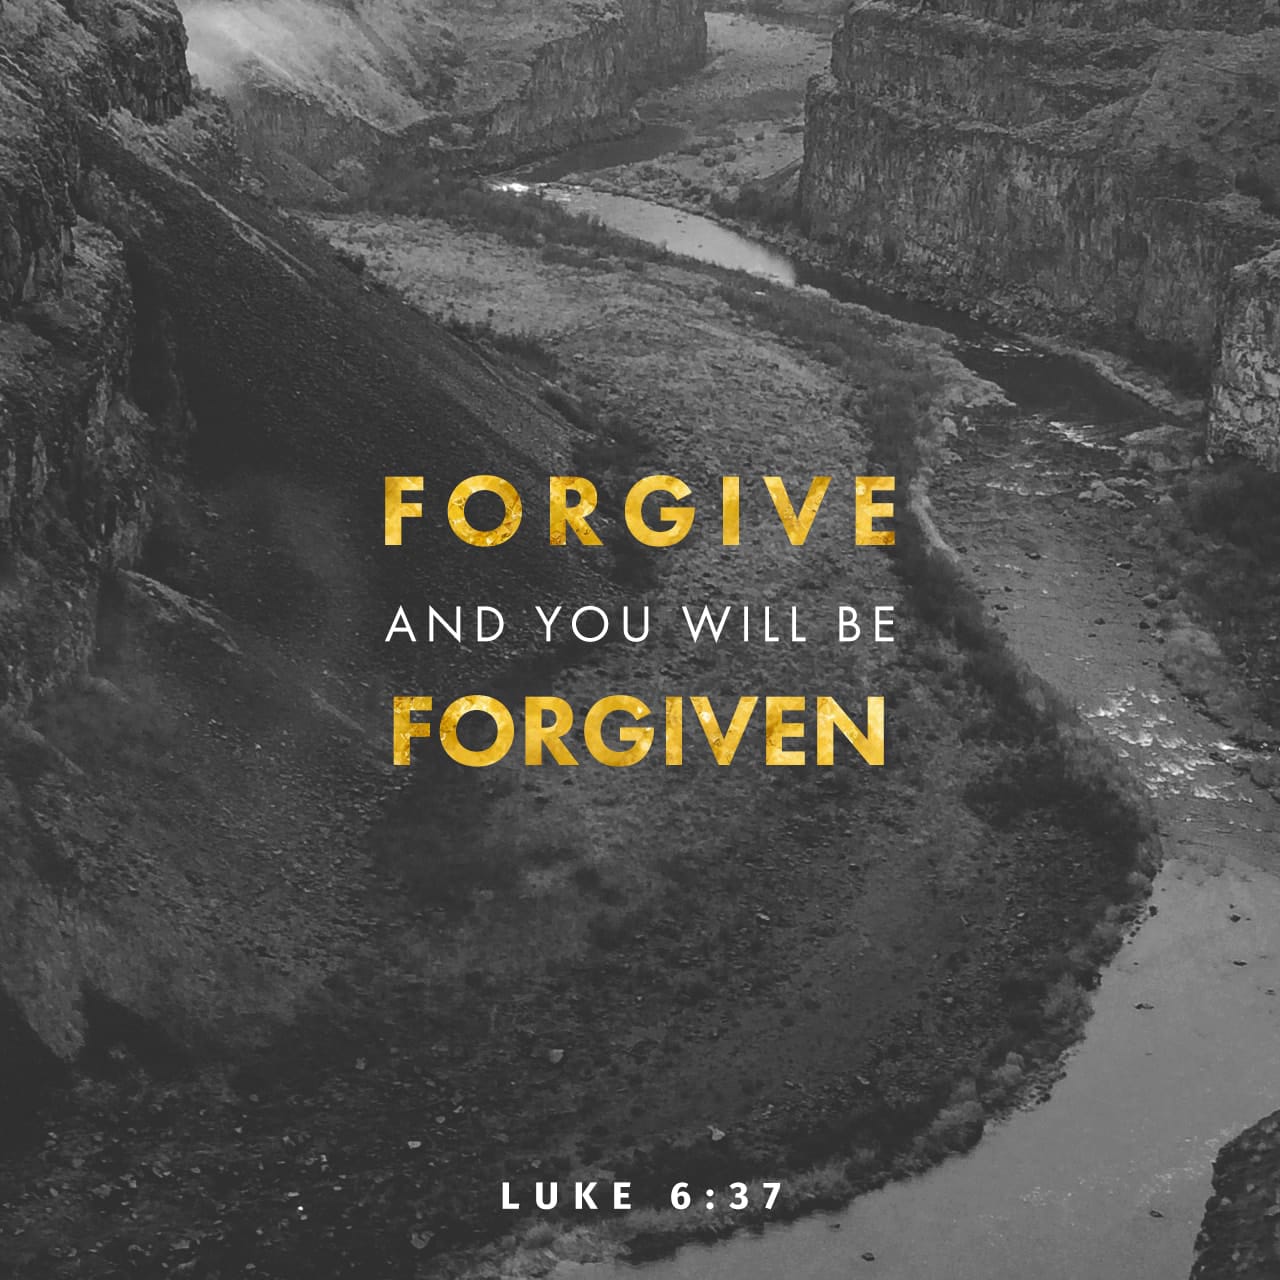 Bible Verse of the Day - day 207 - image 2176 (Luke 6:37)